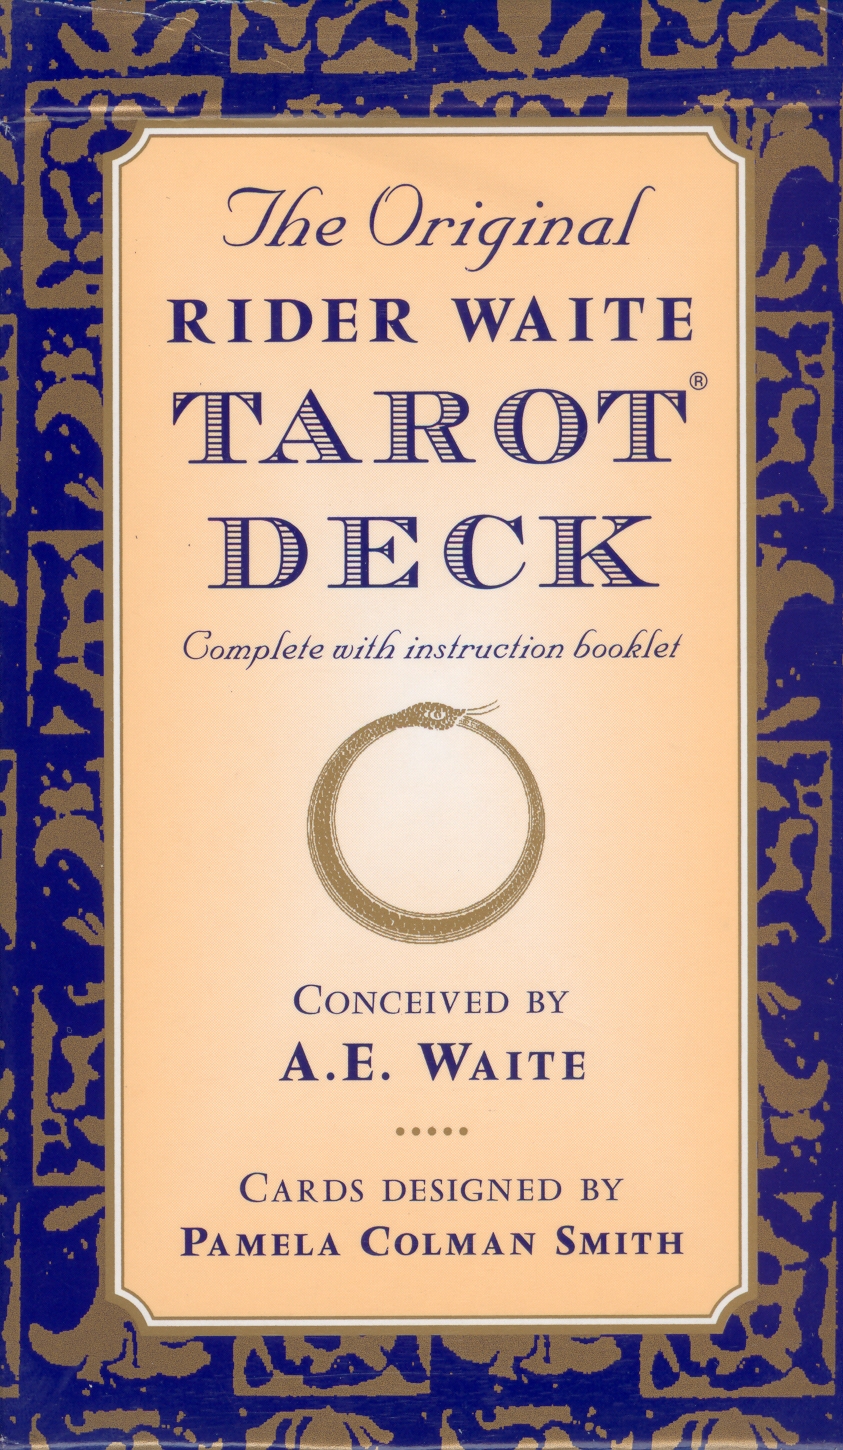 Original Tarot Cards Based On The Rider Waite Tarot Deck Fully Remastered Fortune Telling Tarot Card Deck Tarot Cards Tarot Deck Tarot Cards Deck 